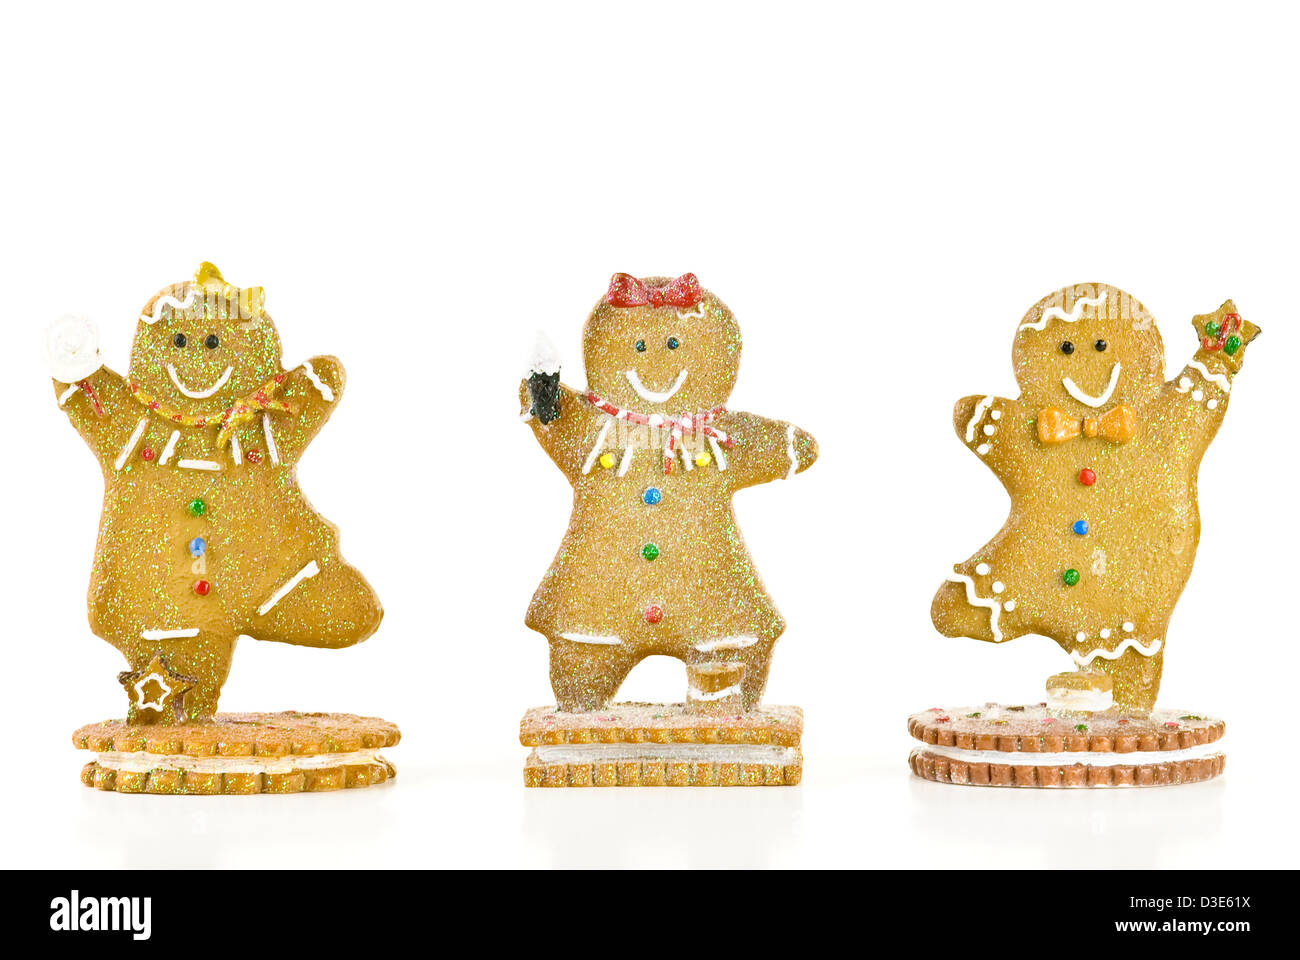 Three glittery holiday gingerbread cookies isolated on white background. Stock Photo